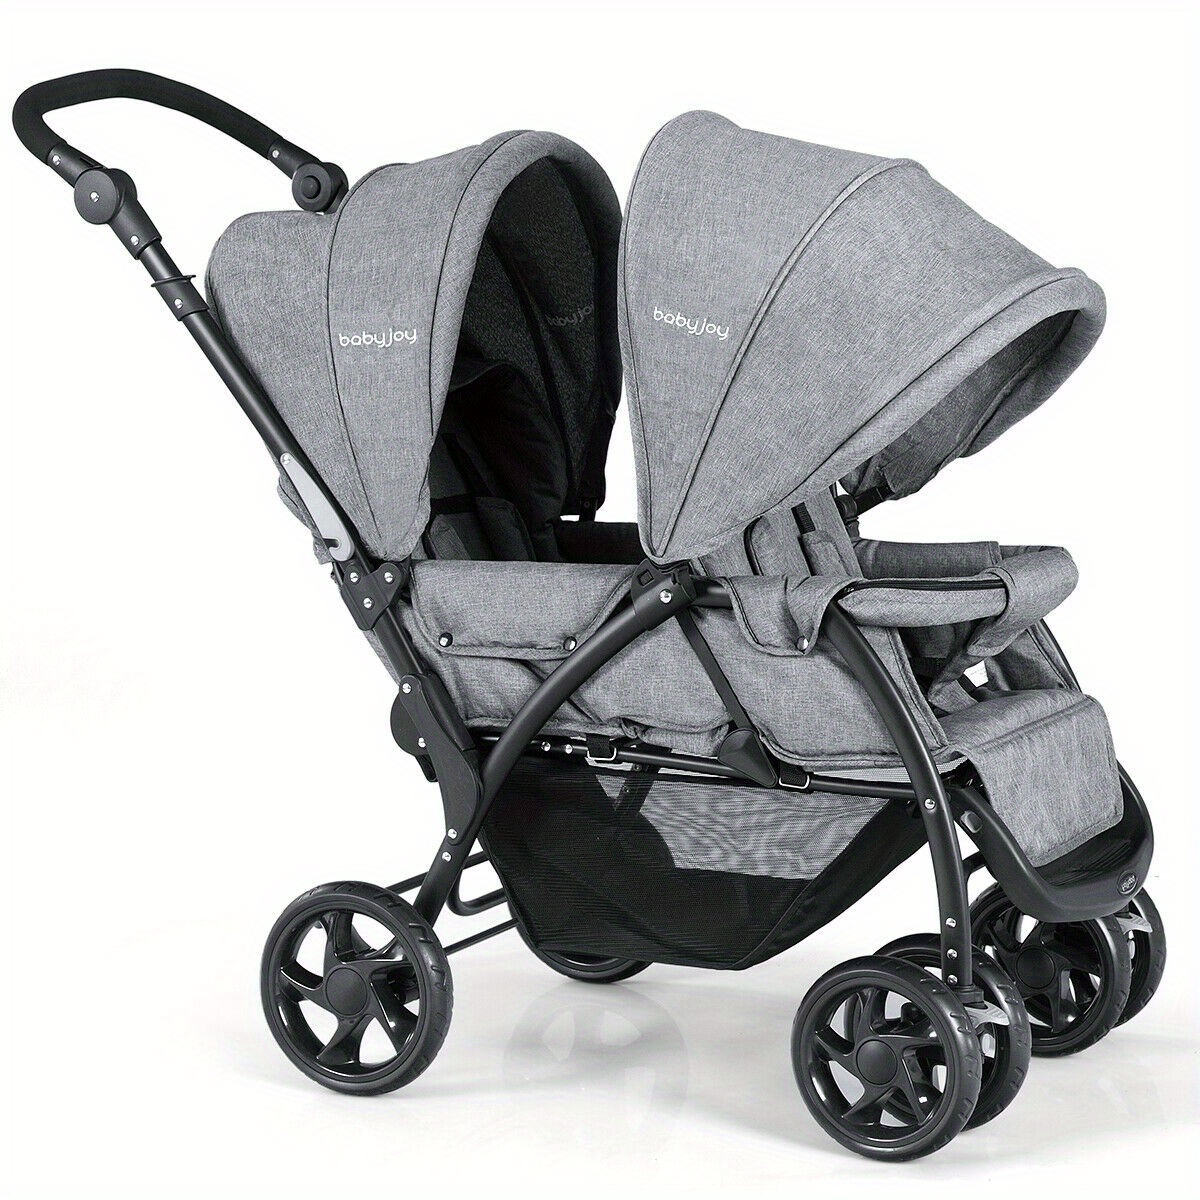 

Multigot Foldable Double Baby Stroller Lightweight Front & Back Seats Pushchair Gray